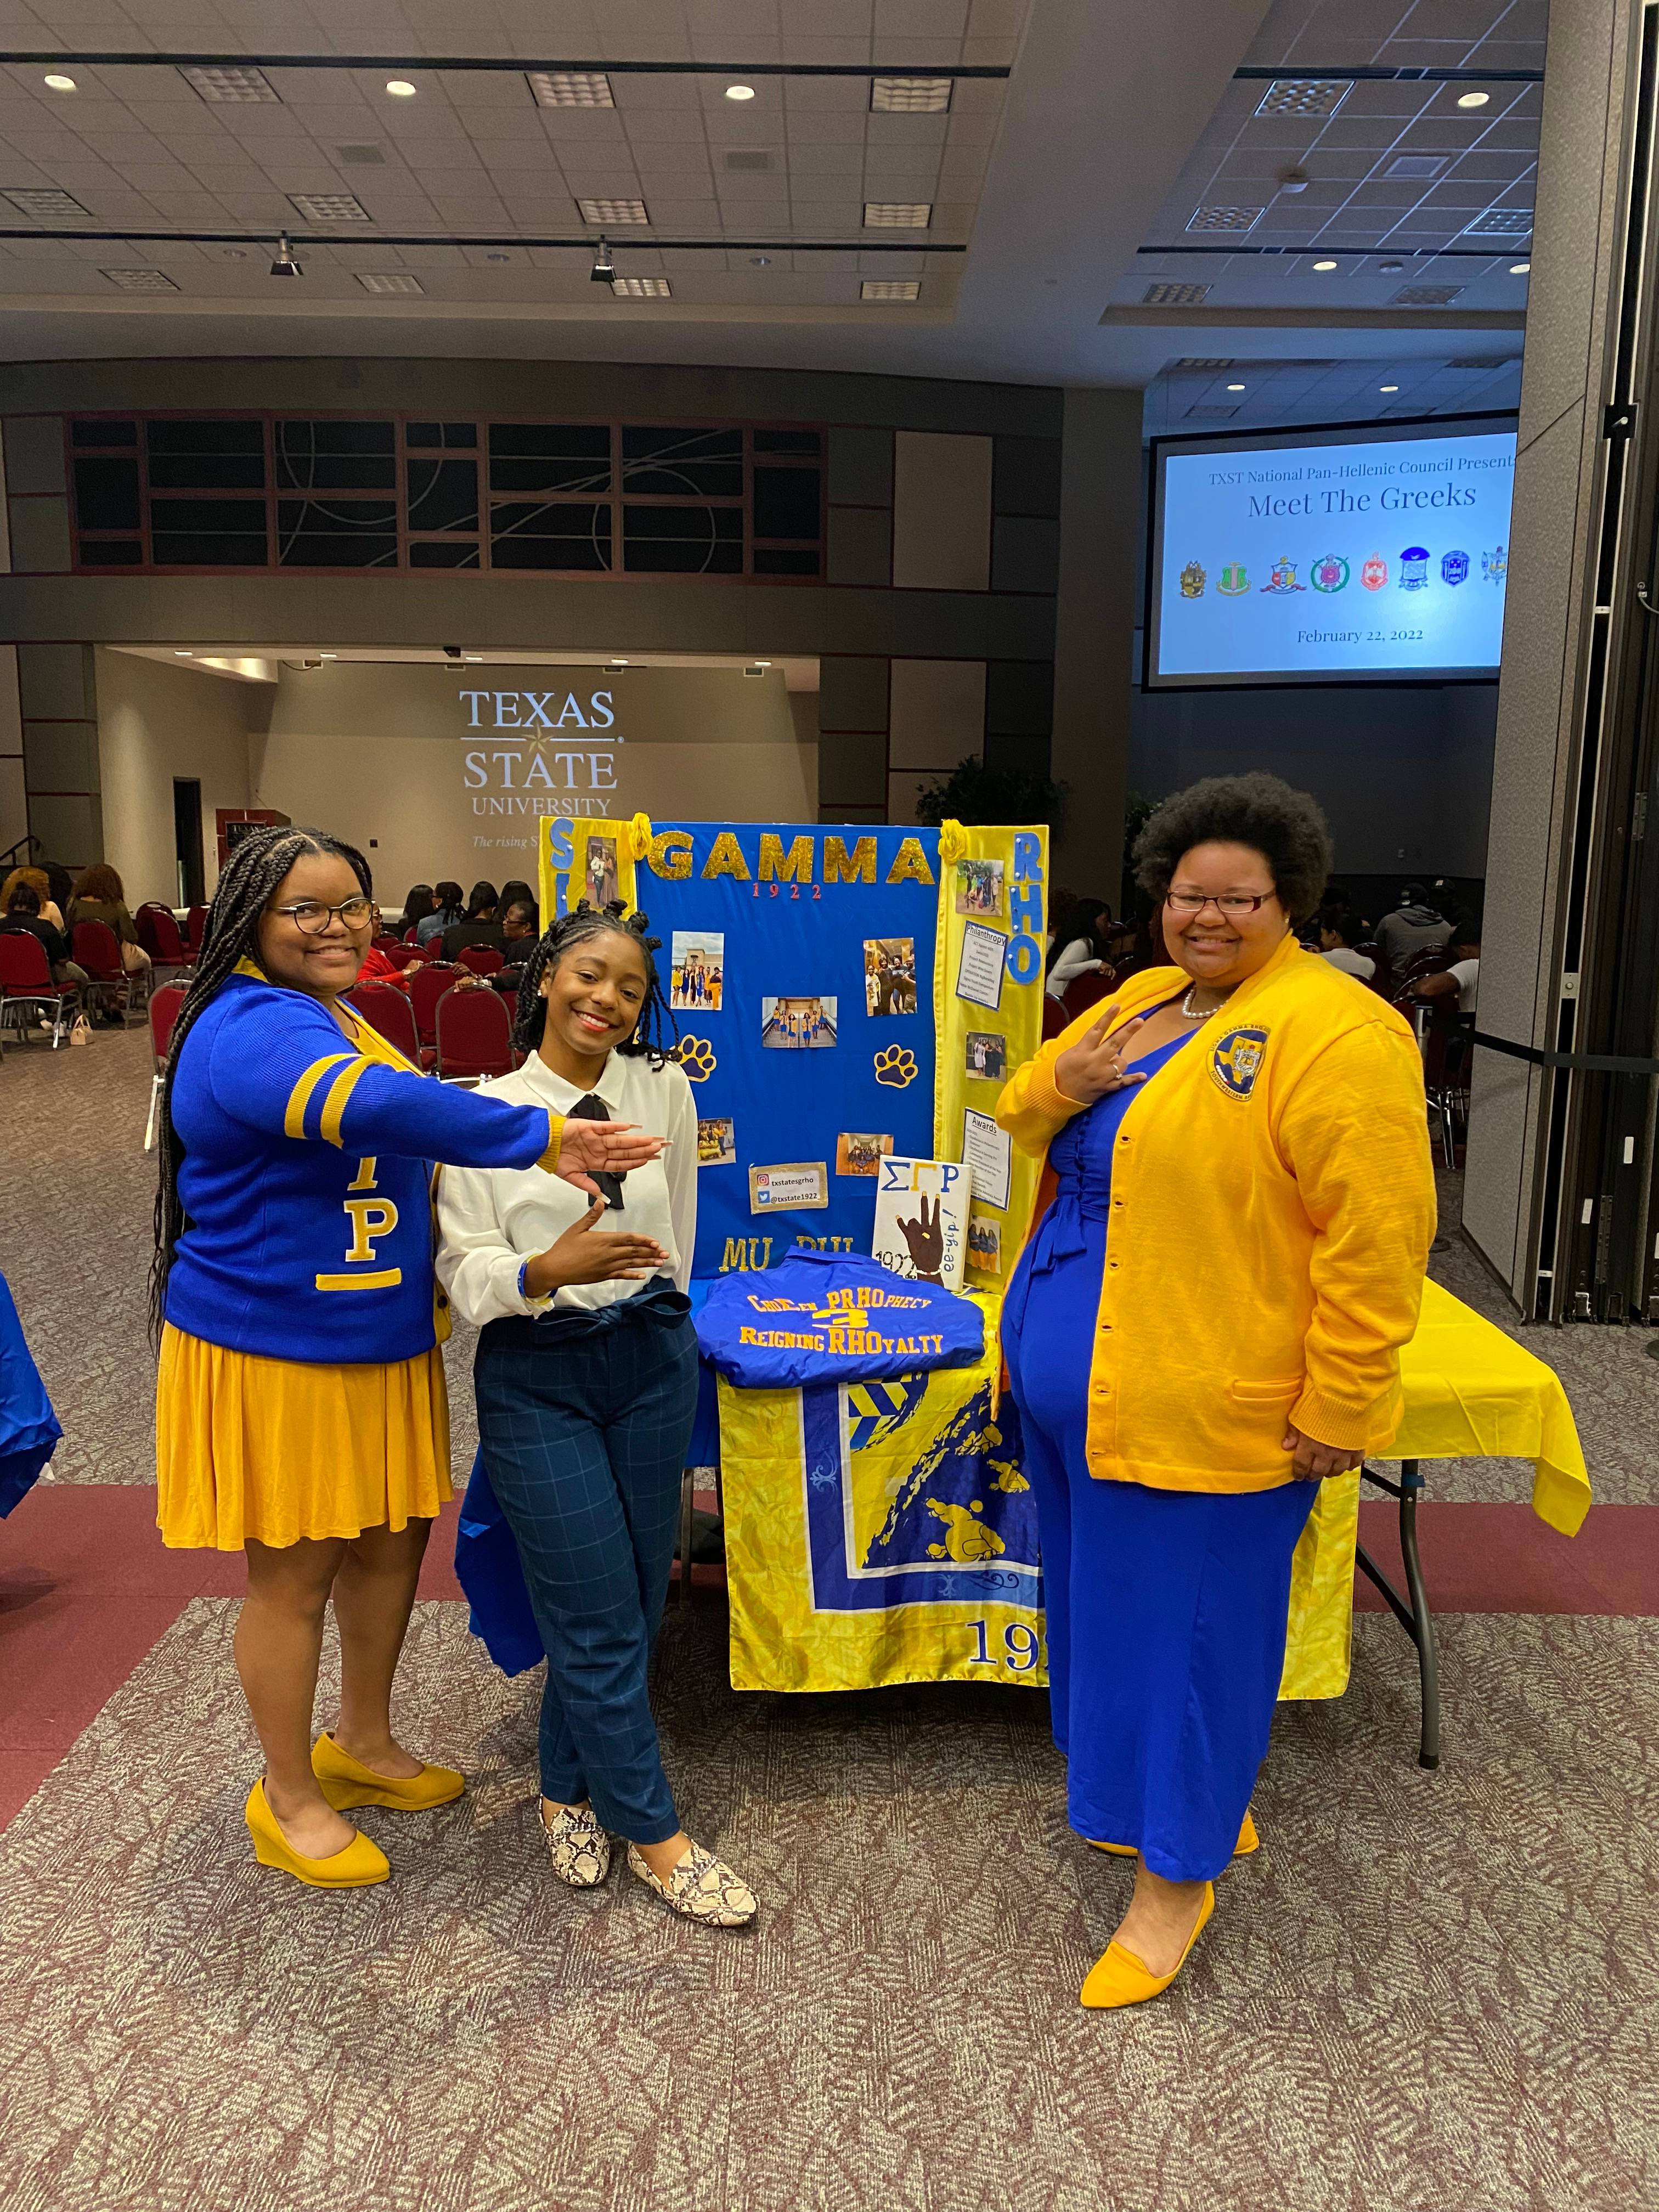 Women of Sigma Gamma Rho wearing their organizations' colors and showing their hand signs while tabling in the LBJ Student Center Ballroom